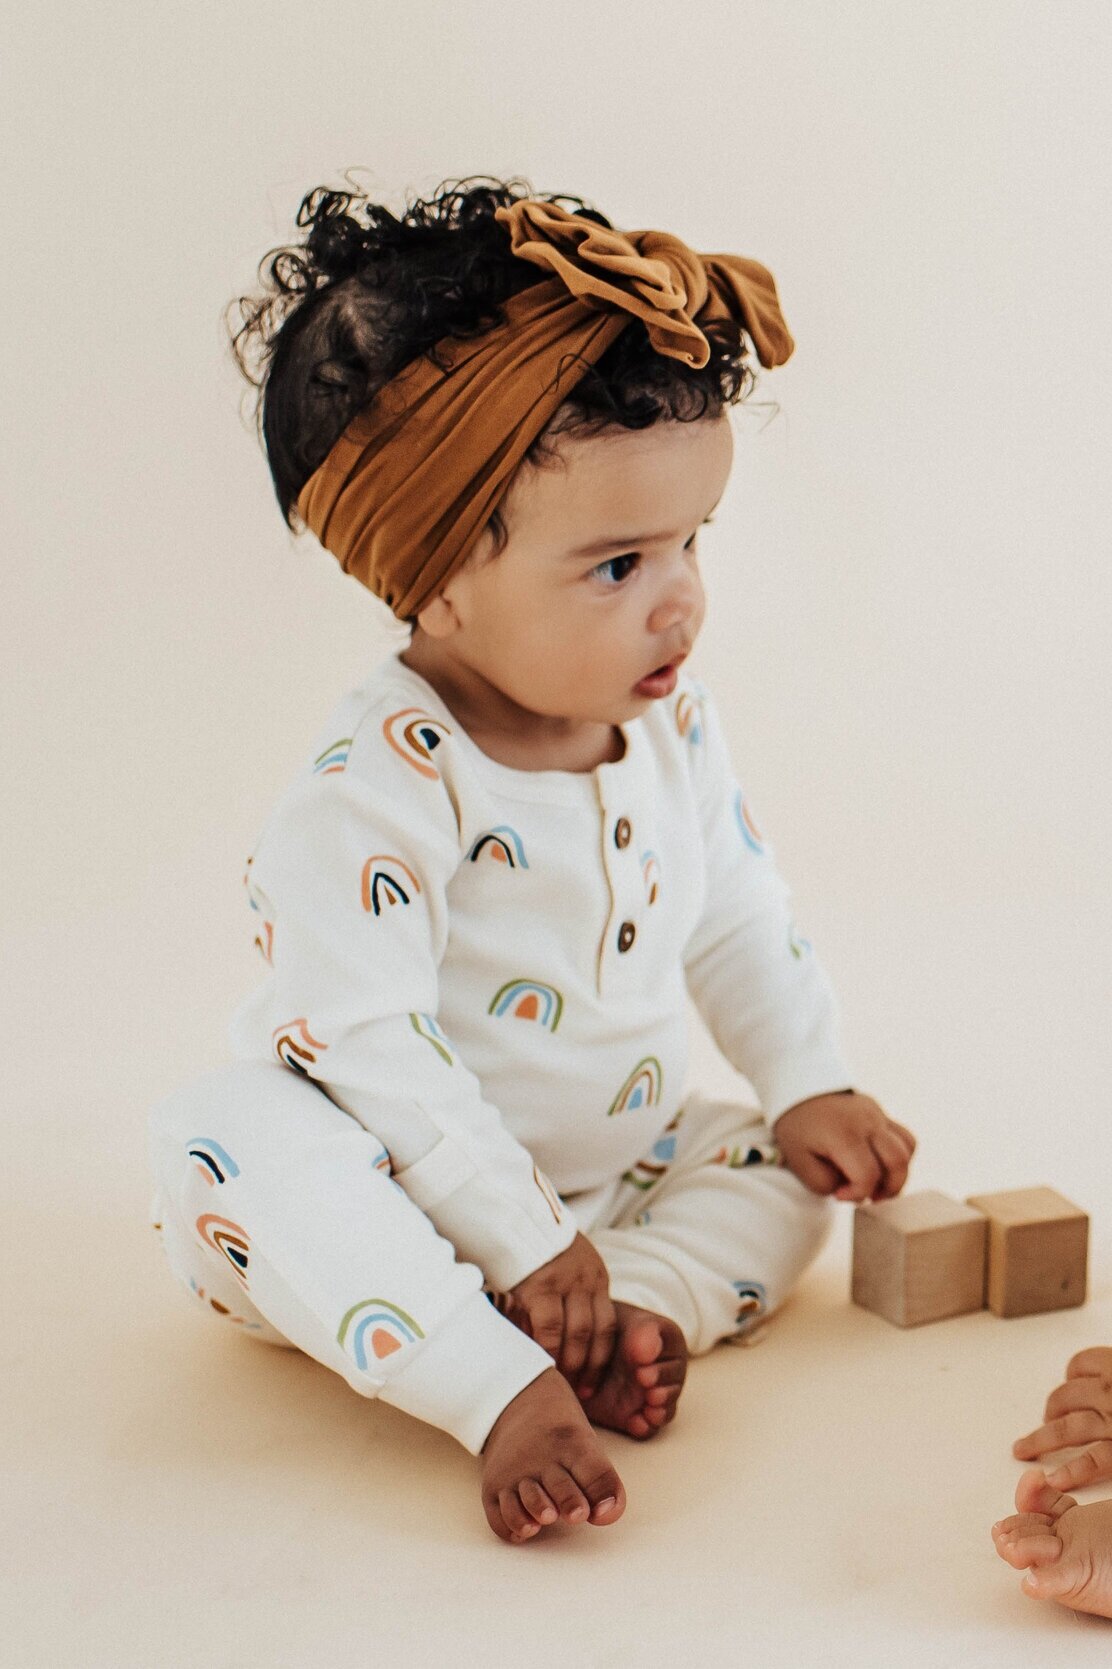 9 Best Baby Winter Clothes for 2020